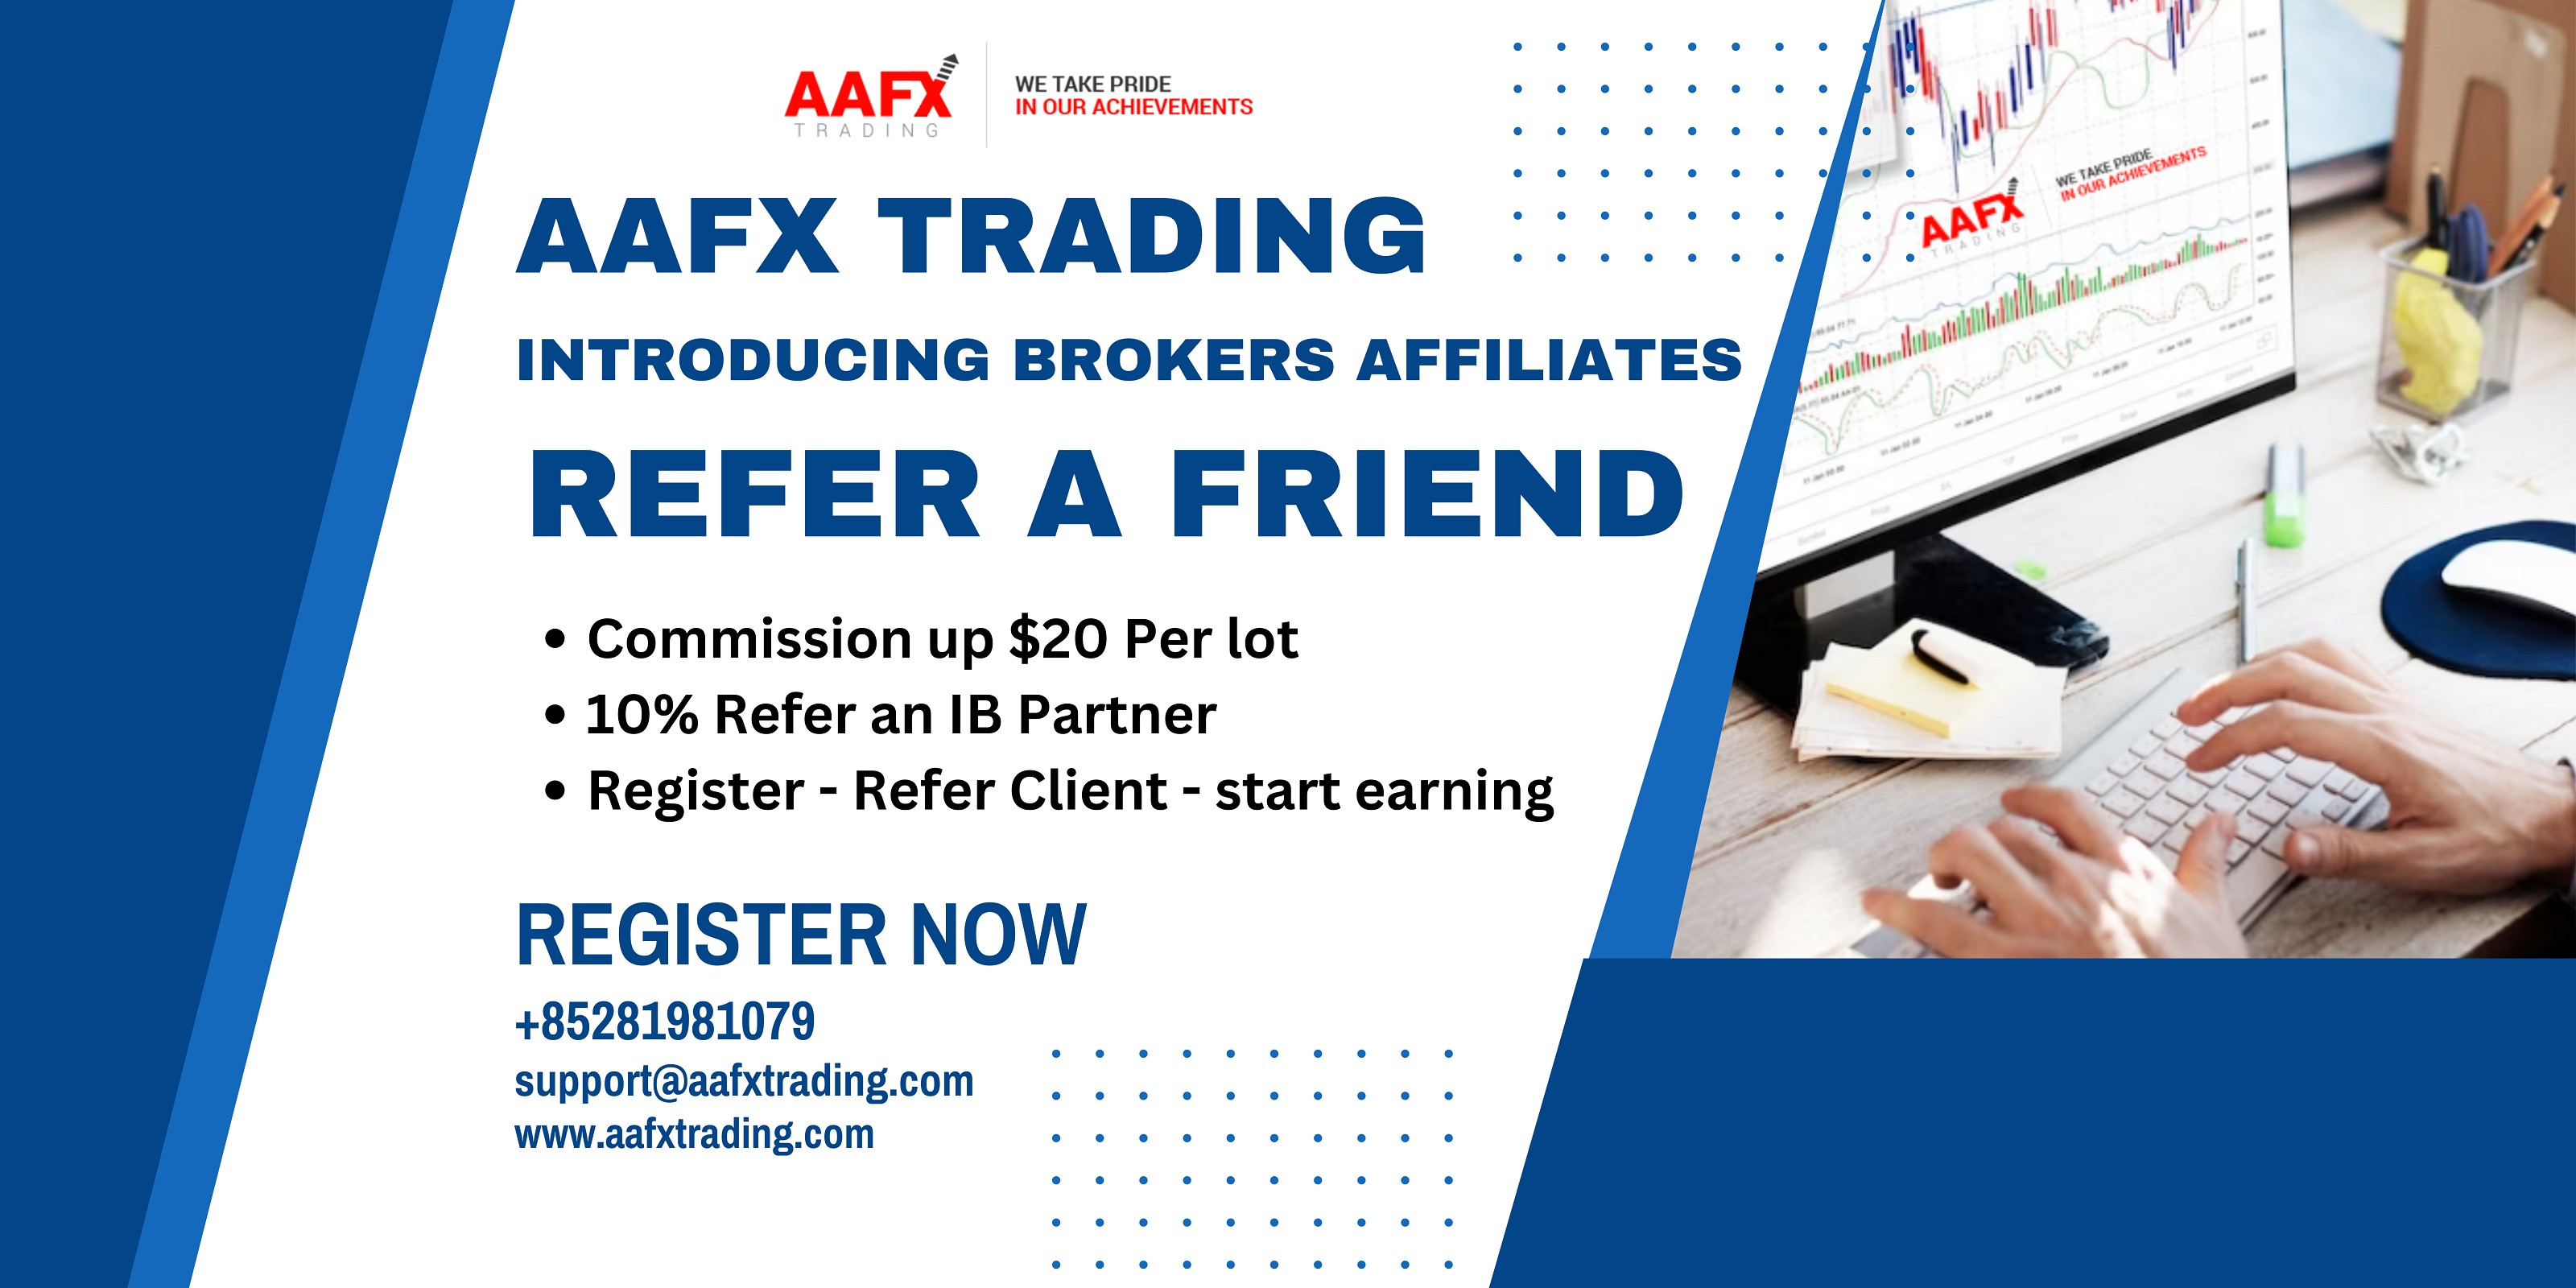 Join Aafxtrading's 'Easy to Earn with Brokers' affiliate program